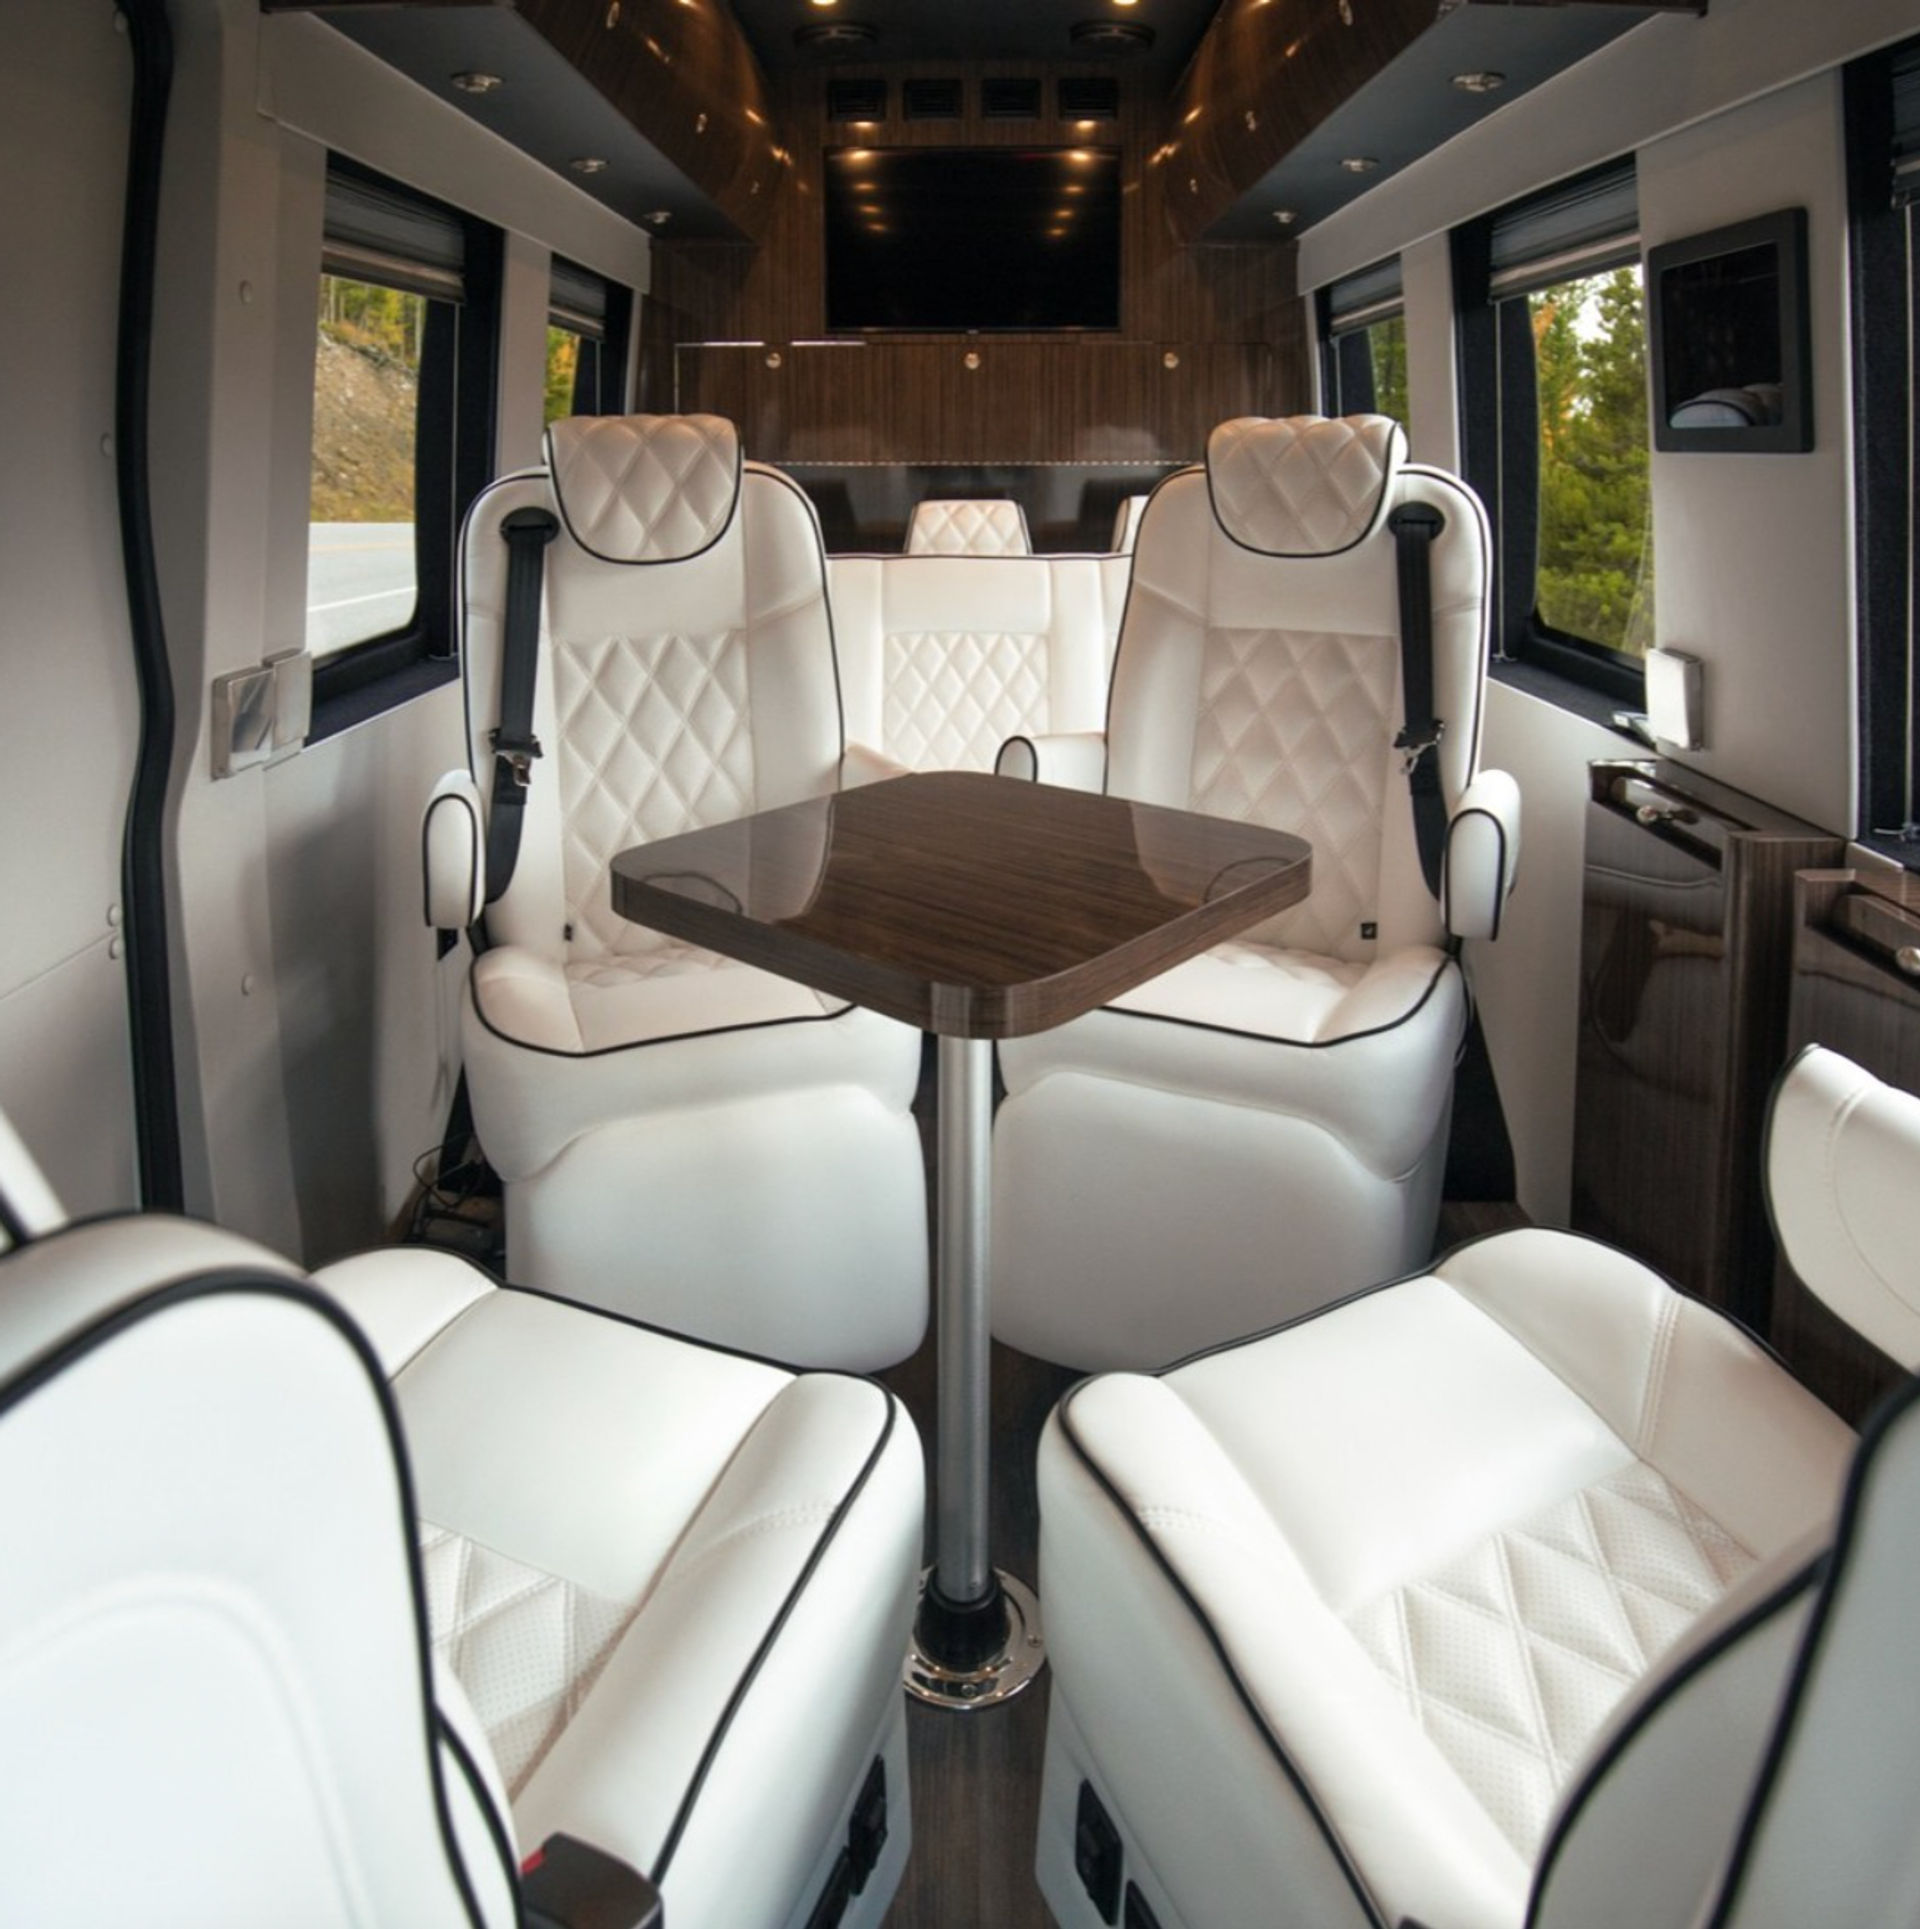 Private Jet-Style Luxury Transportation with TVs & Amenities On Board image 5